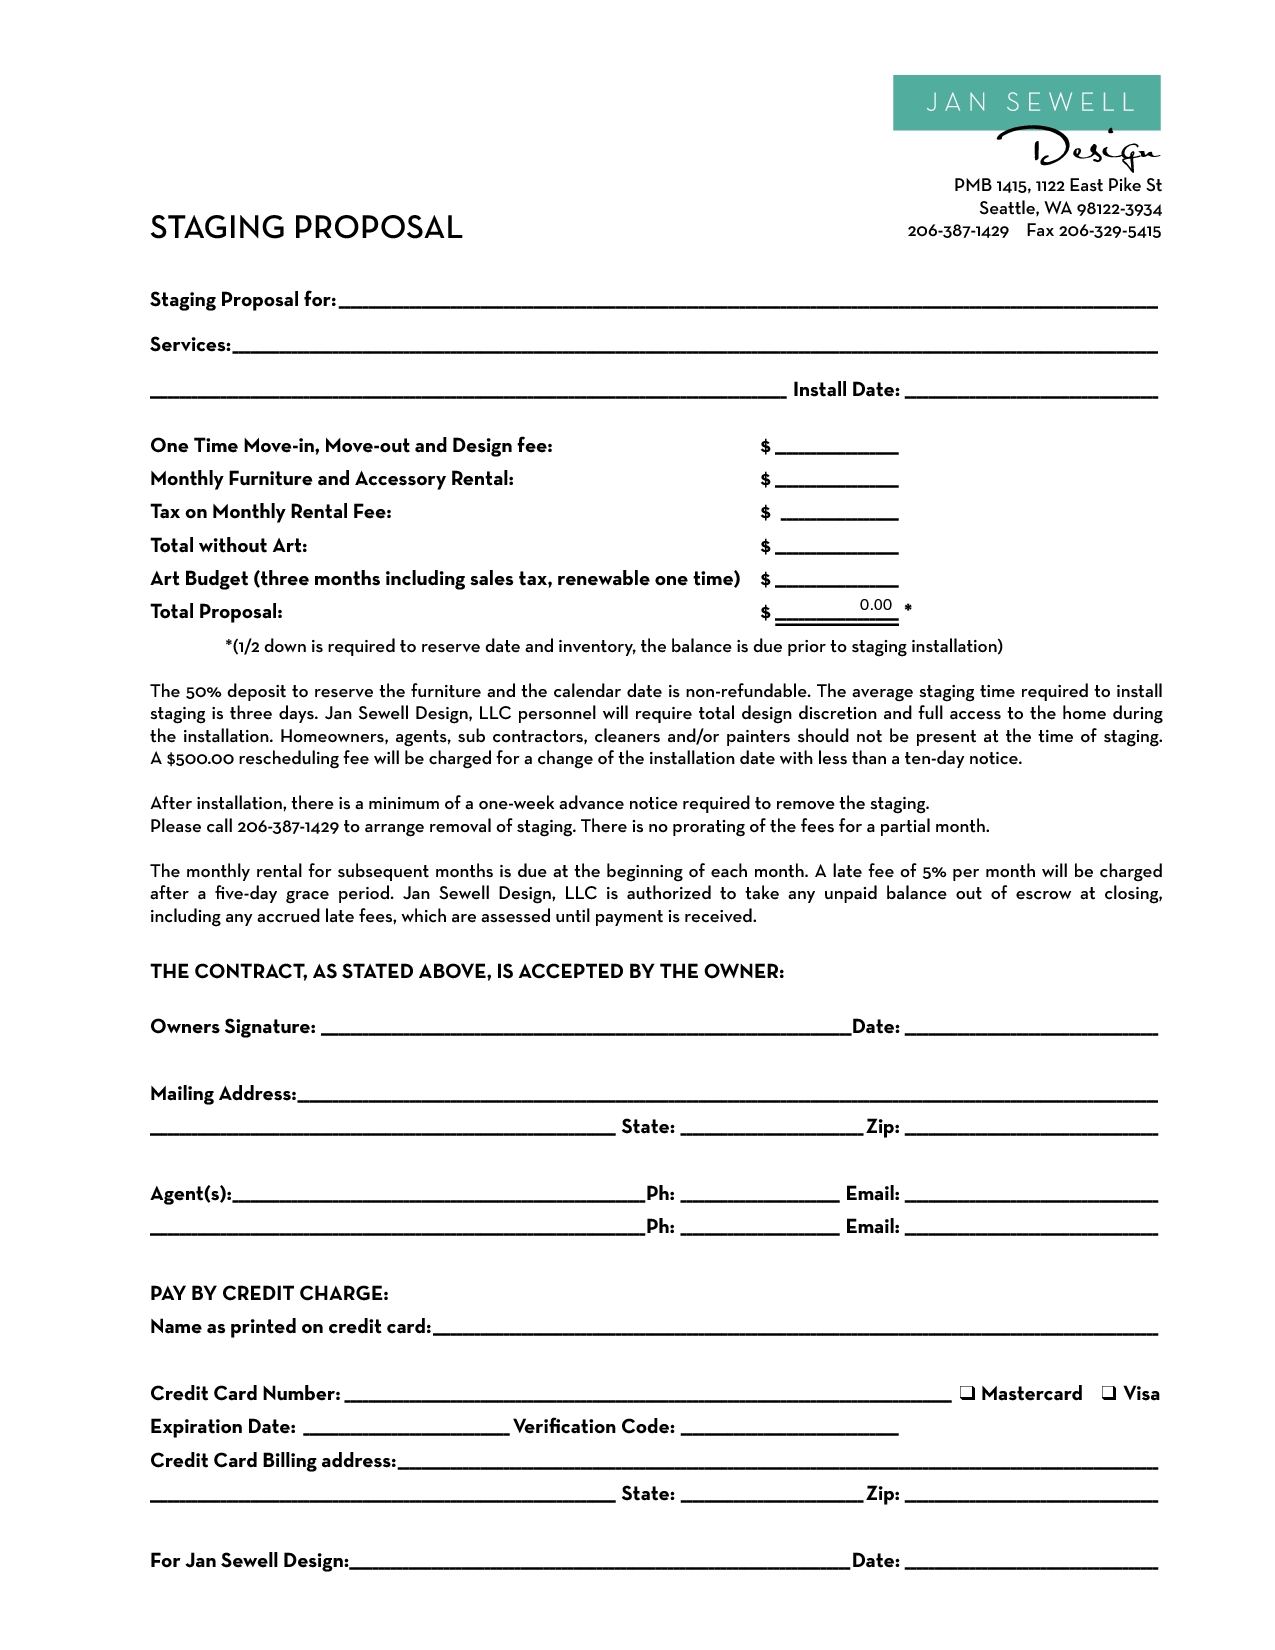 home staging contract template bing images home staging a simple home staging contract